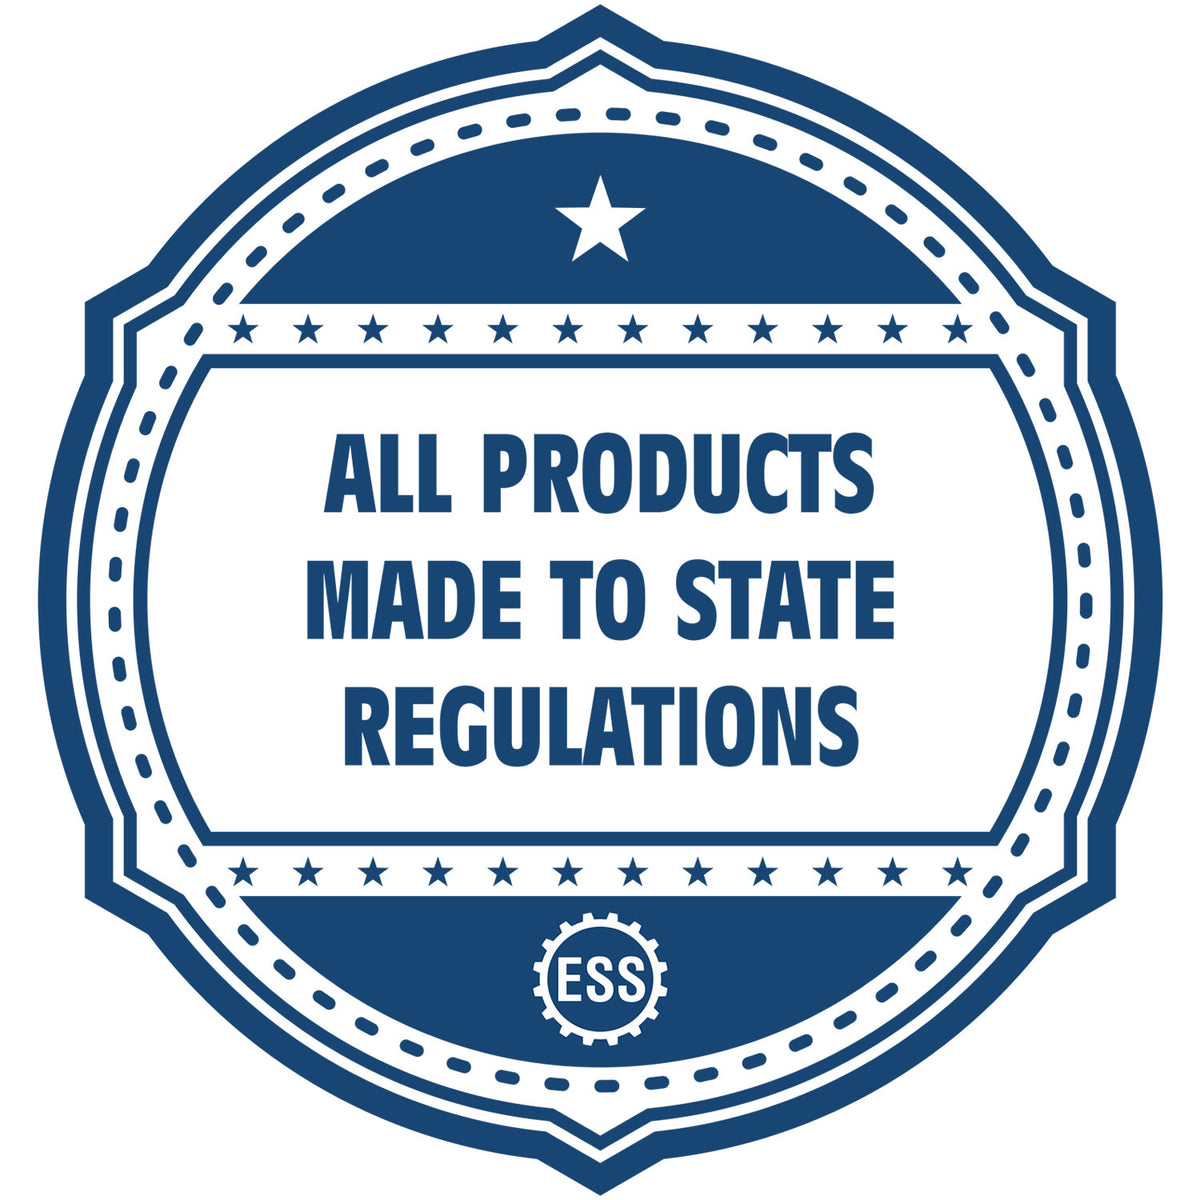 An icon or badge element for the Super Slim Oklahoma Notary Public Stamp showing that this product is made in compliance with state regulations.